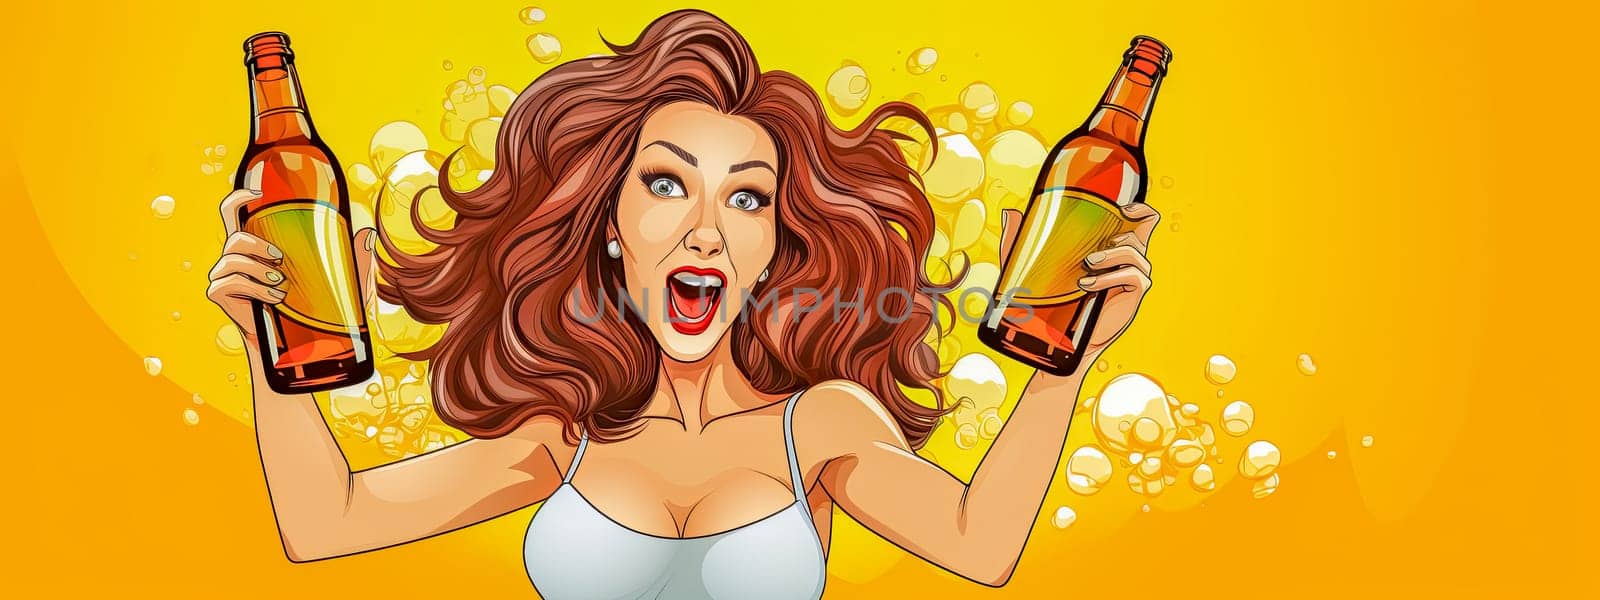 Excited Woman Celebrating with Beer Bottles. cartoon, retro